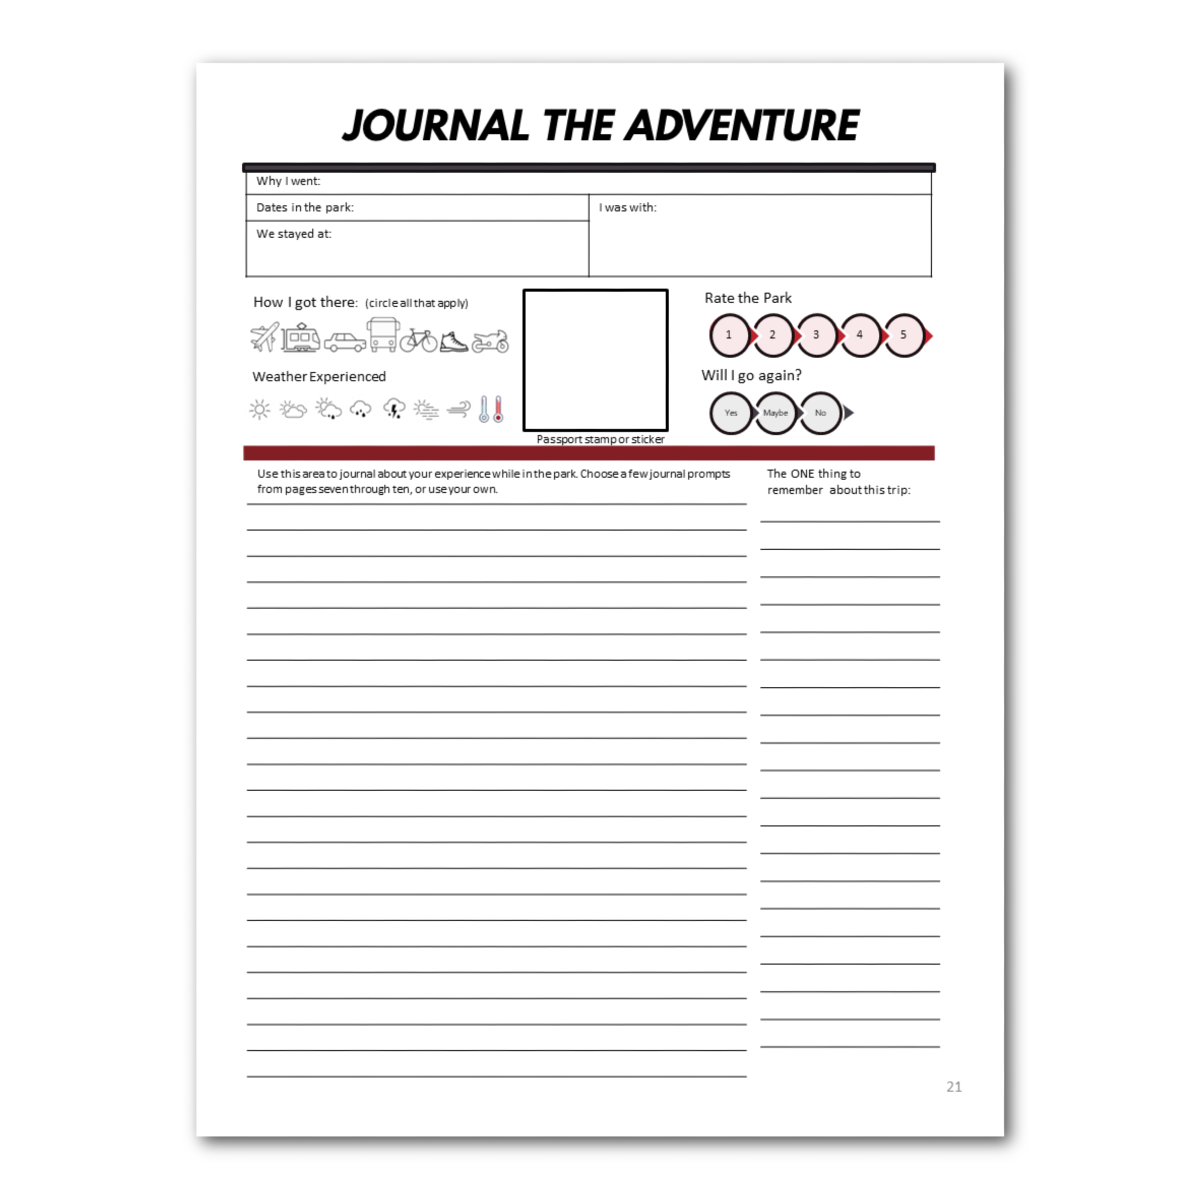 Texas State Parks Bucket Journal - Printable